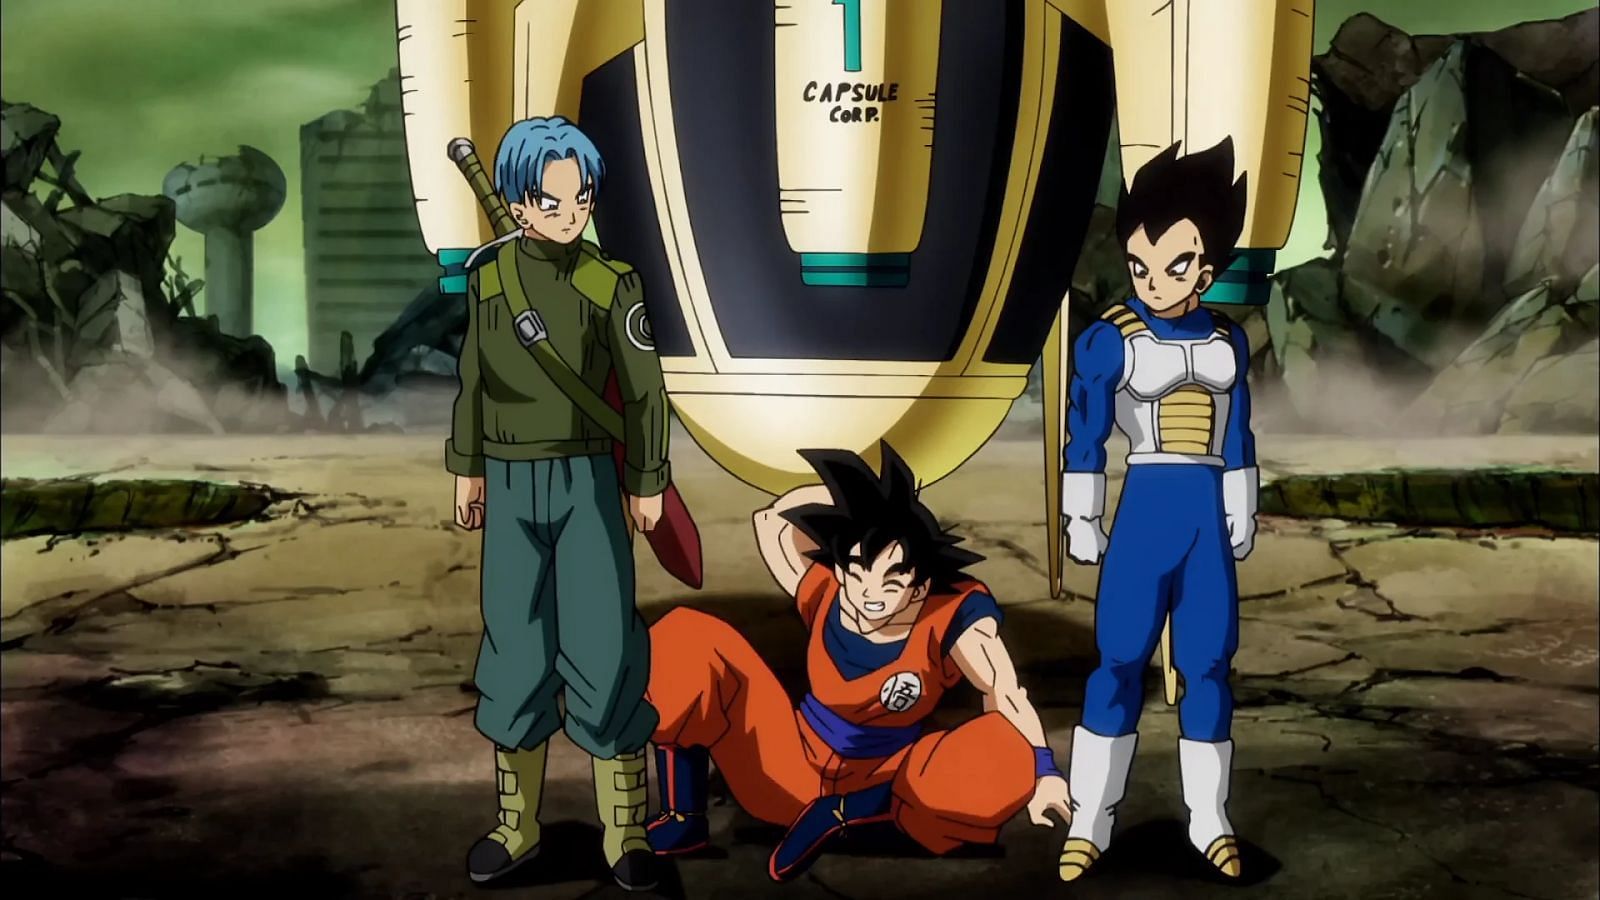 Dragon Ball Super Episode 92: Emergency Development! The Incomplete Ten  Members!! Review